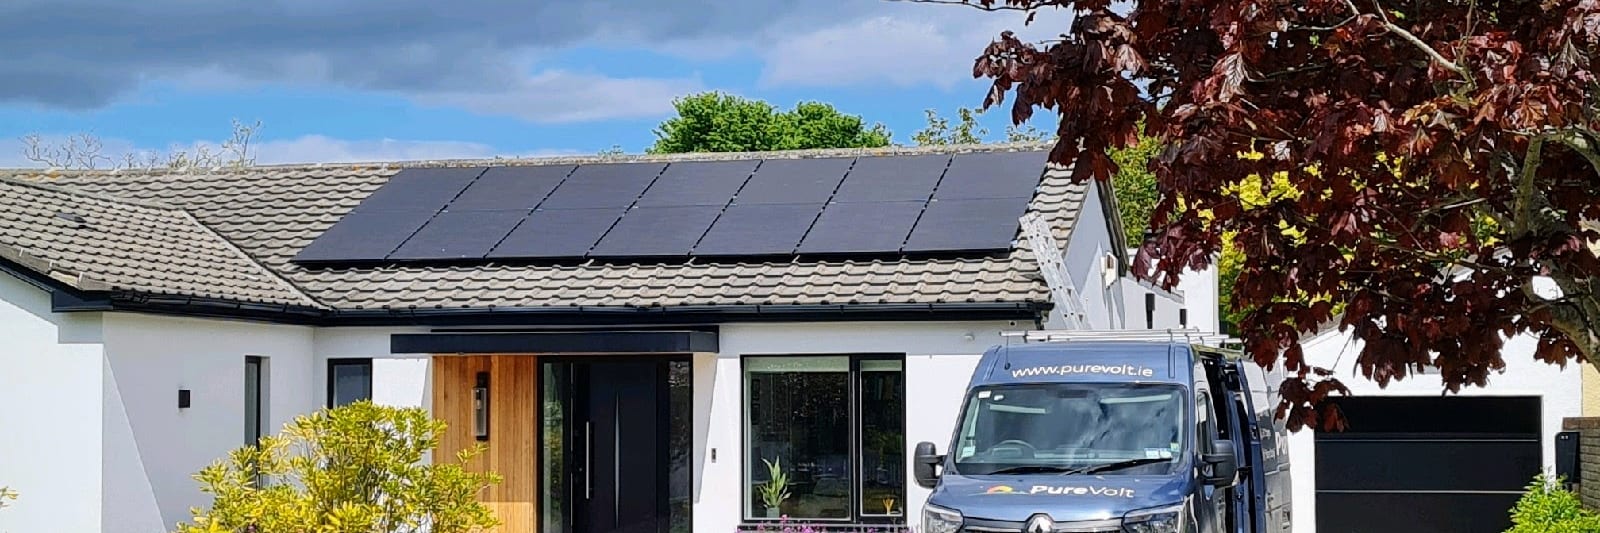 Solar on roof of house